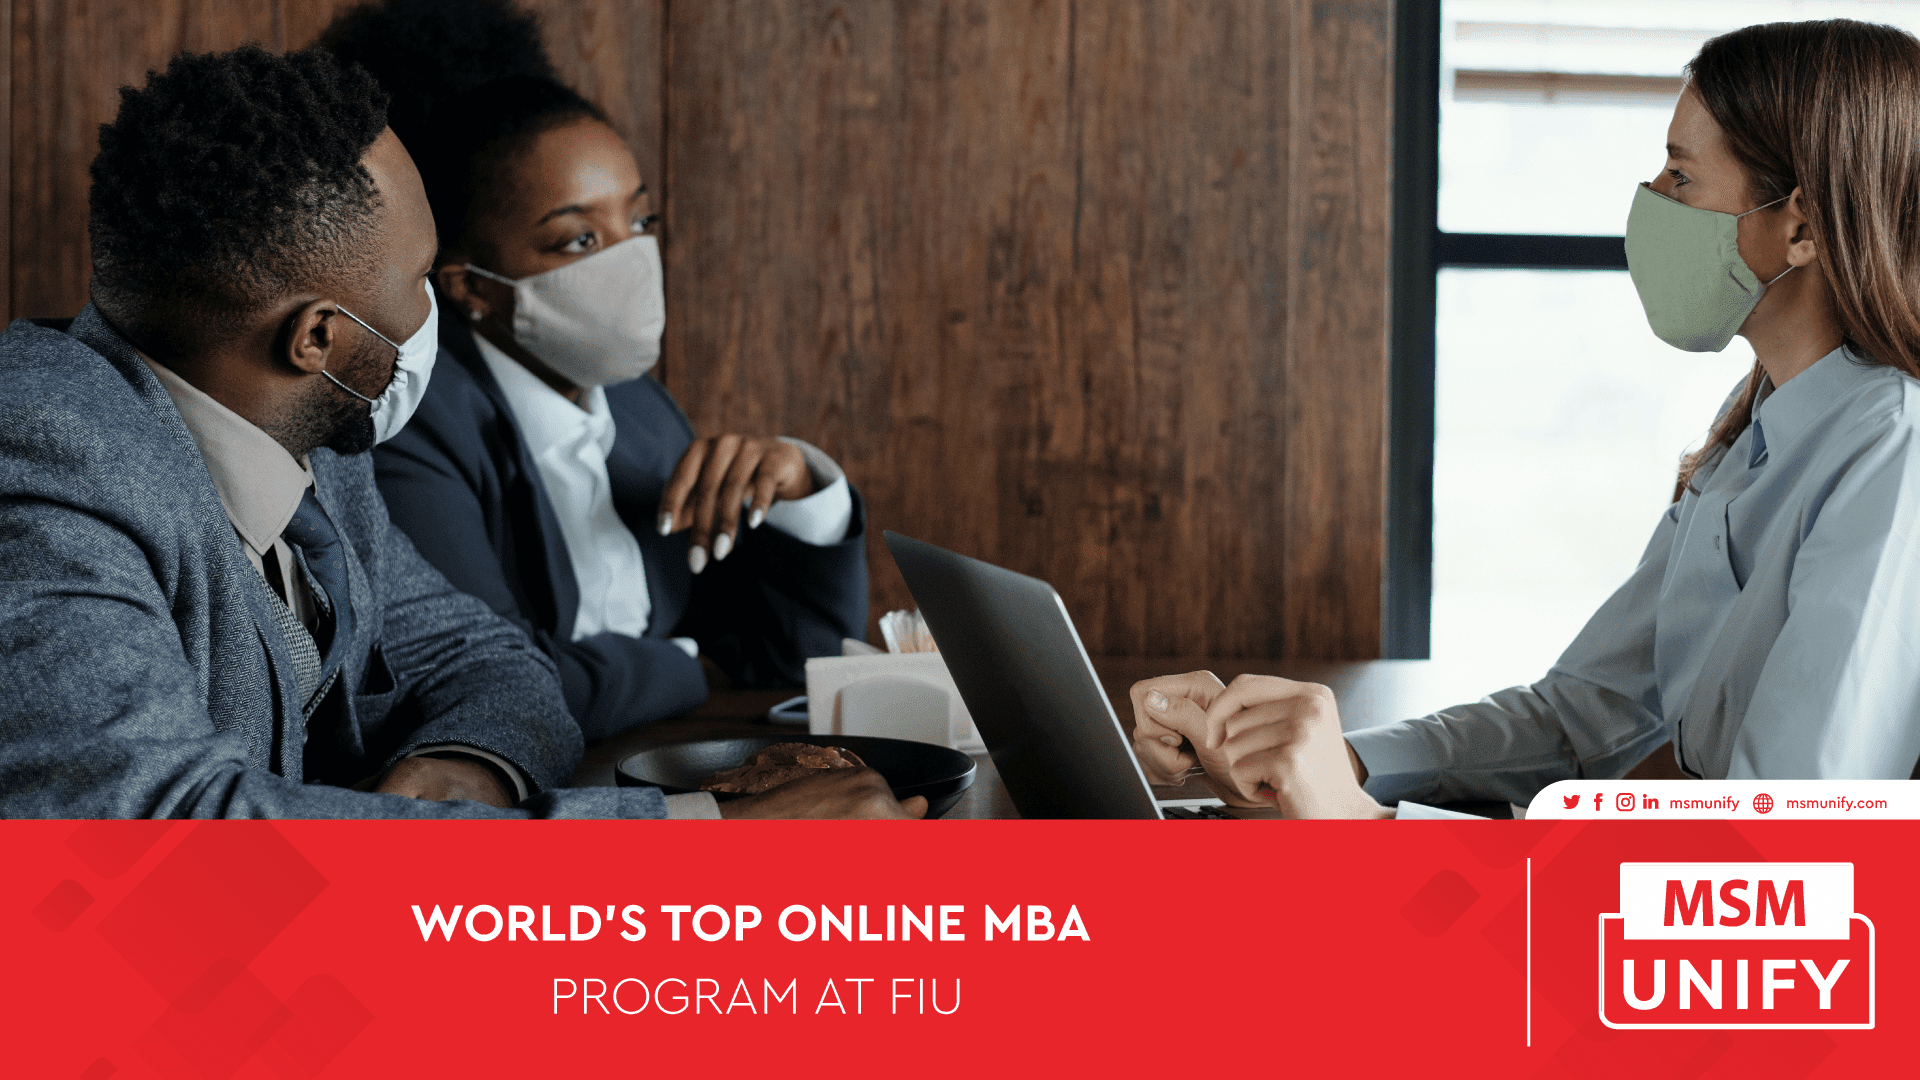 MSM Unify WORLDS TOP ONLINE MBA PROGRAM AT FIU